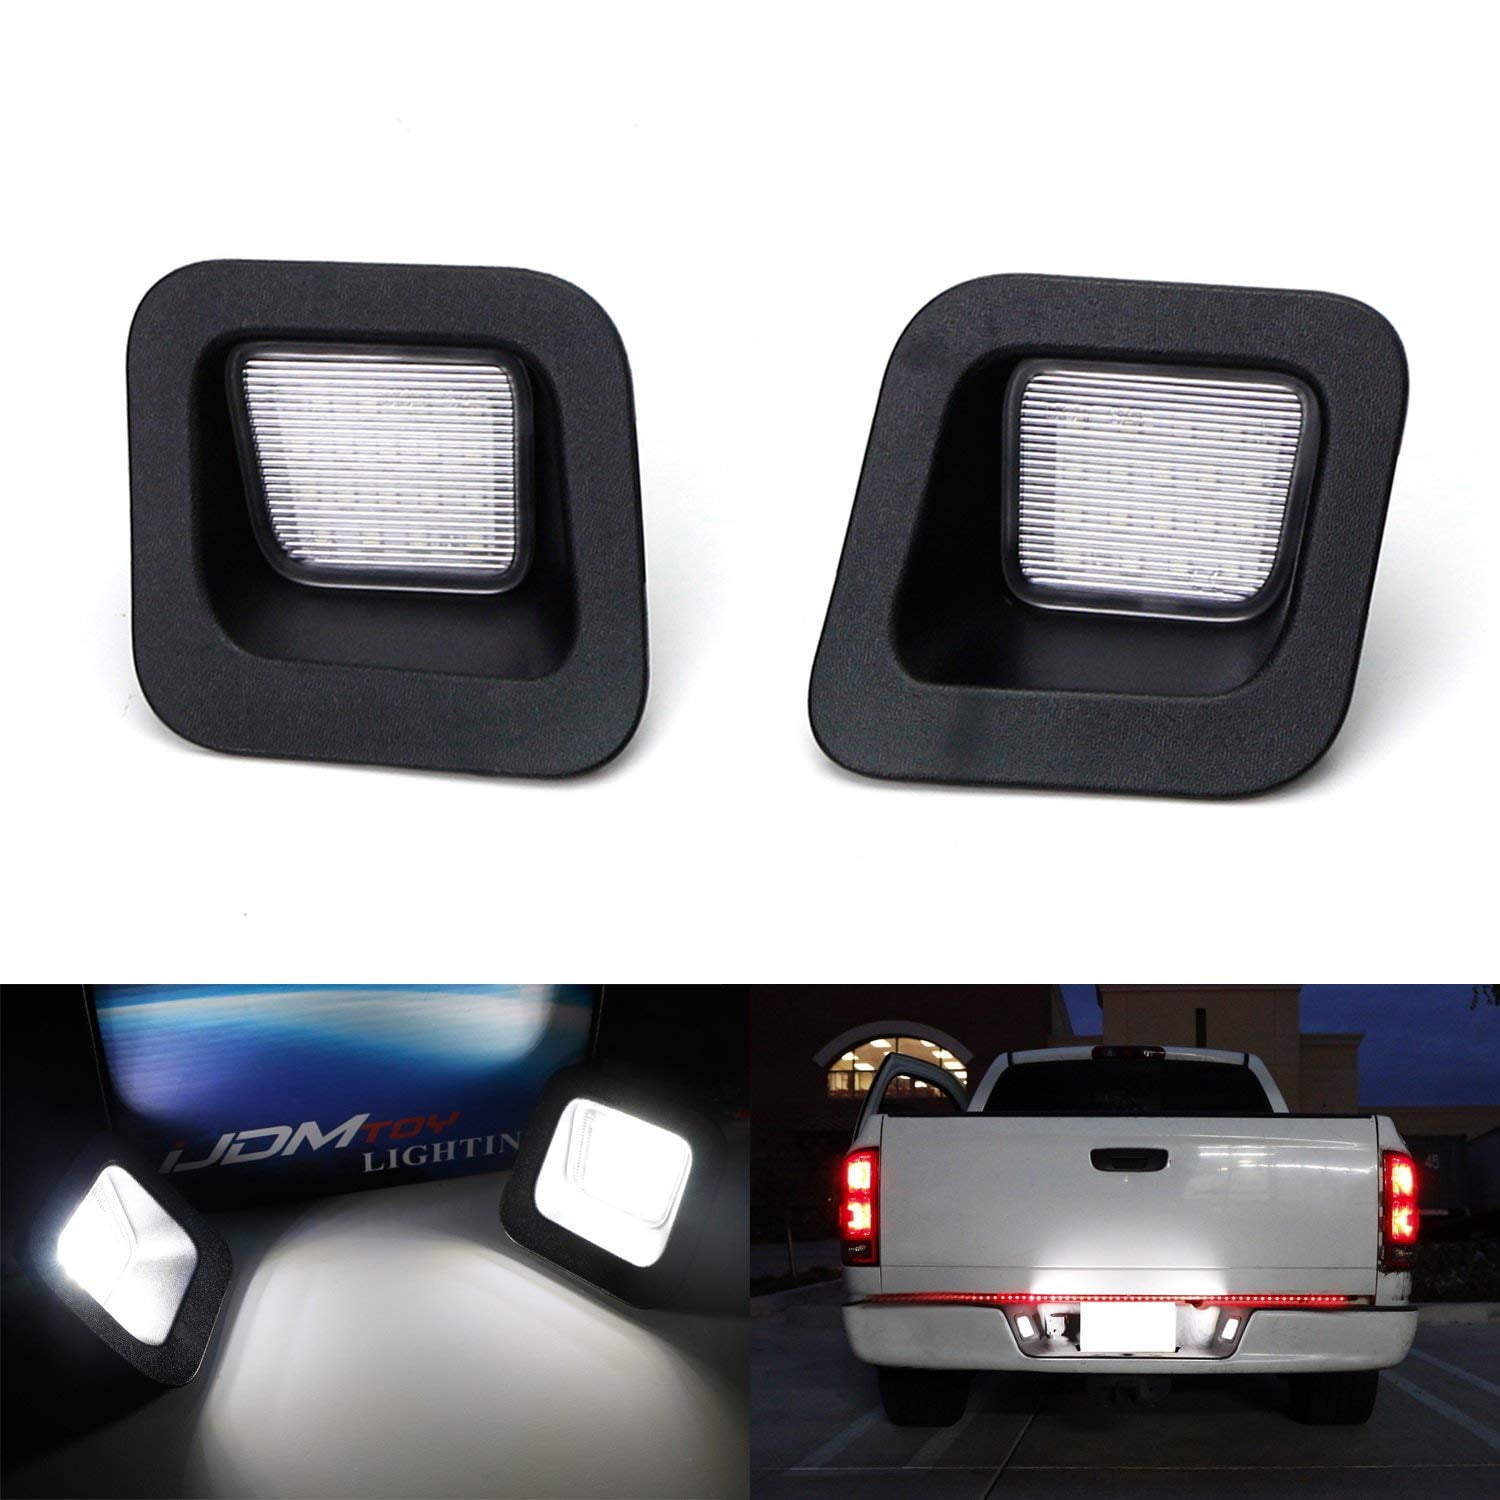 MbuyDIY LED License Plate Light Lamp Assembly Smoke Lens Compatible with 2003-2018 Dodge Ram 1500 2500 3500 Pickup Truck 6000K White Pack of 2